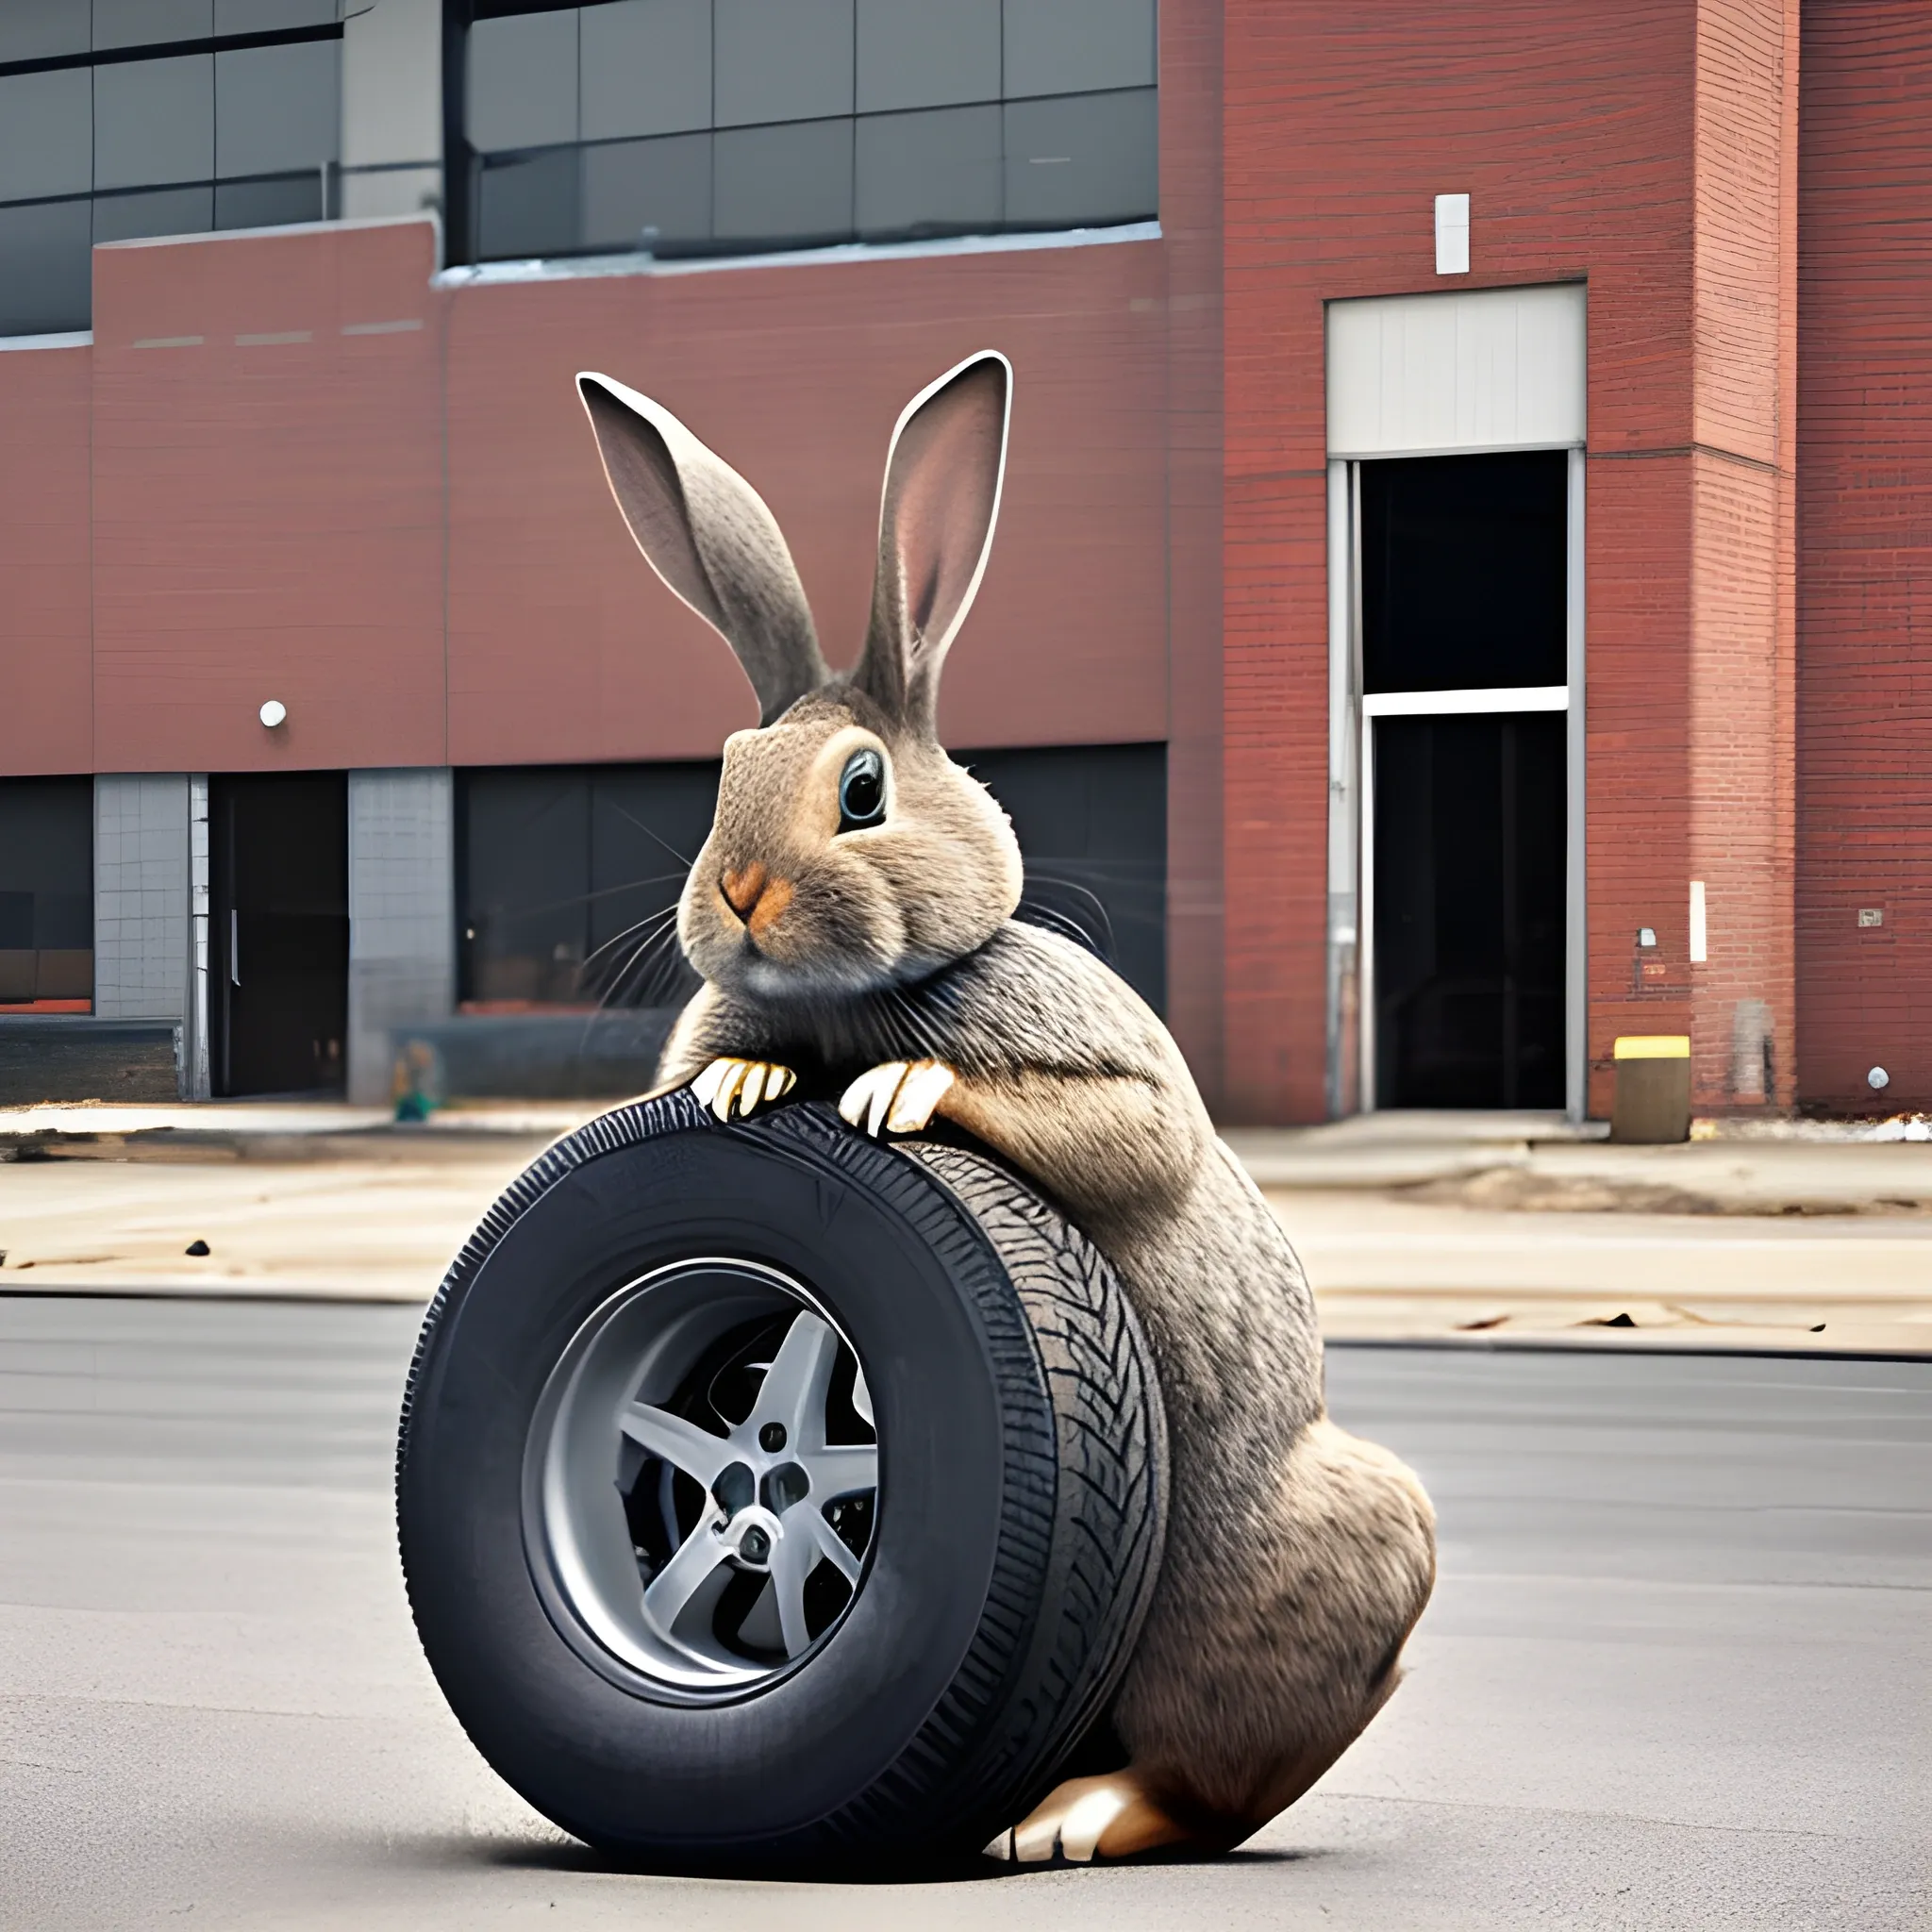 a large rabbit eats tire in front of a factory, photograph